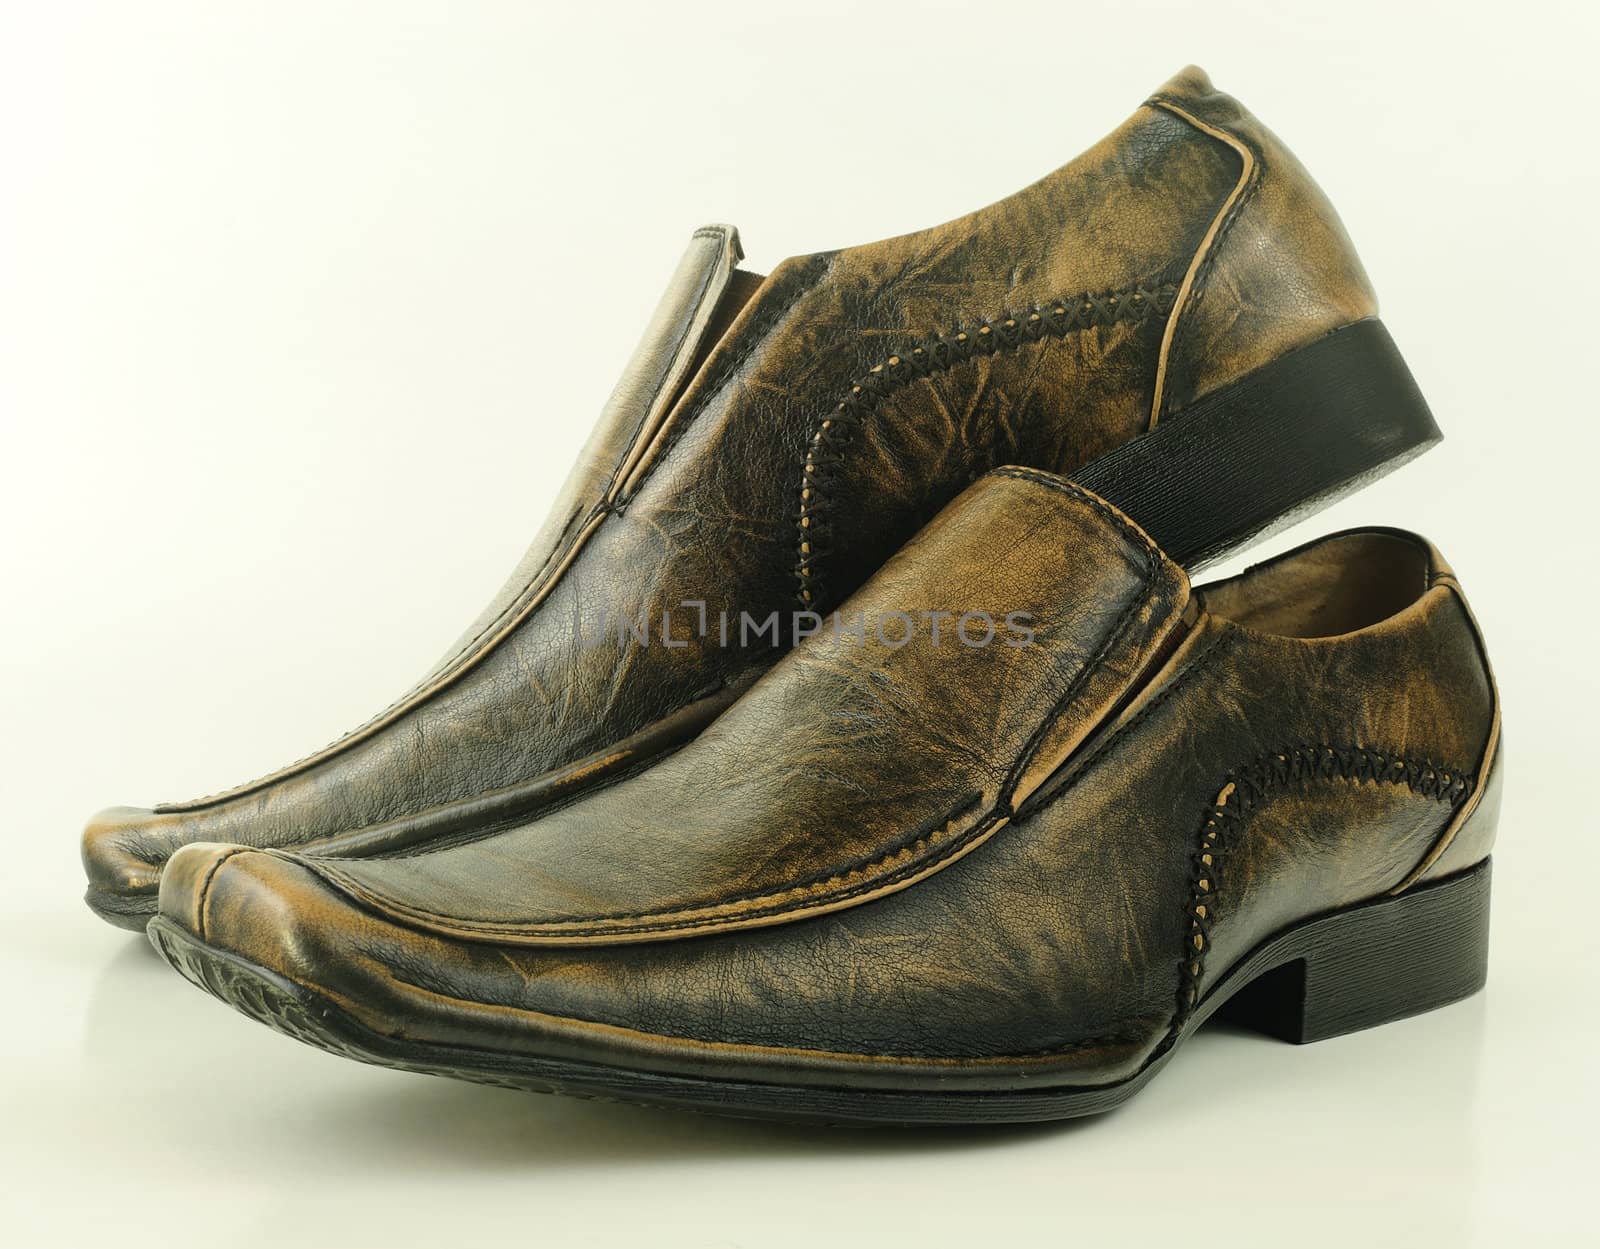 stylish pair of shoes by neelsky